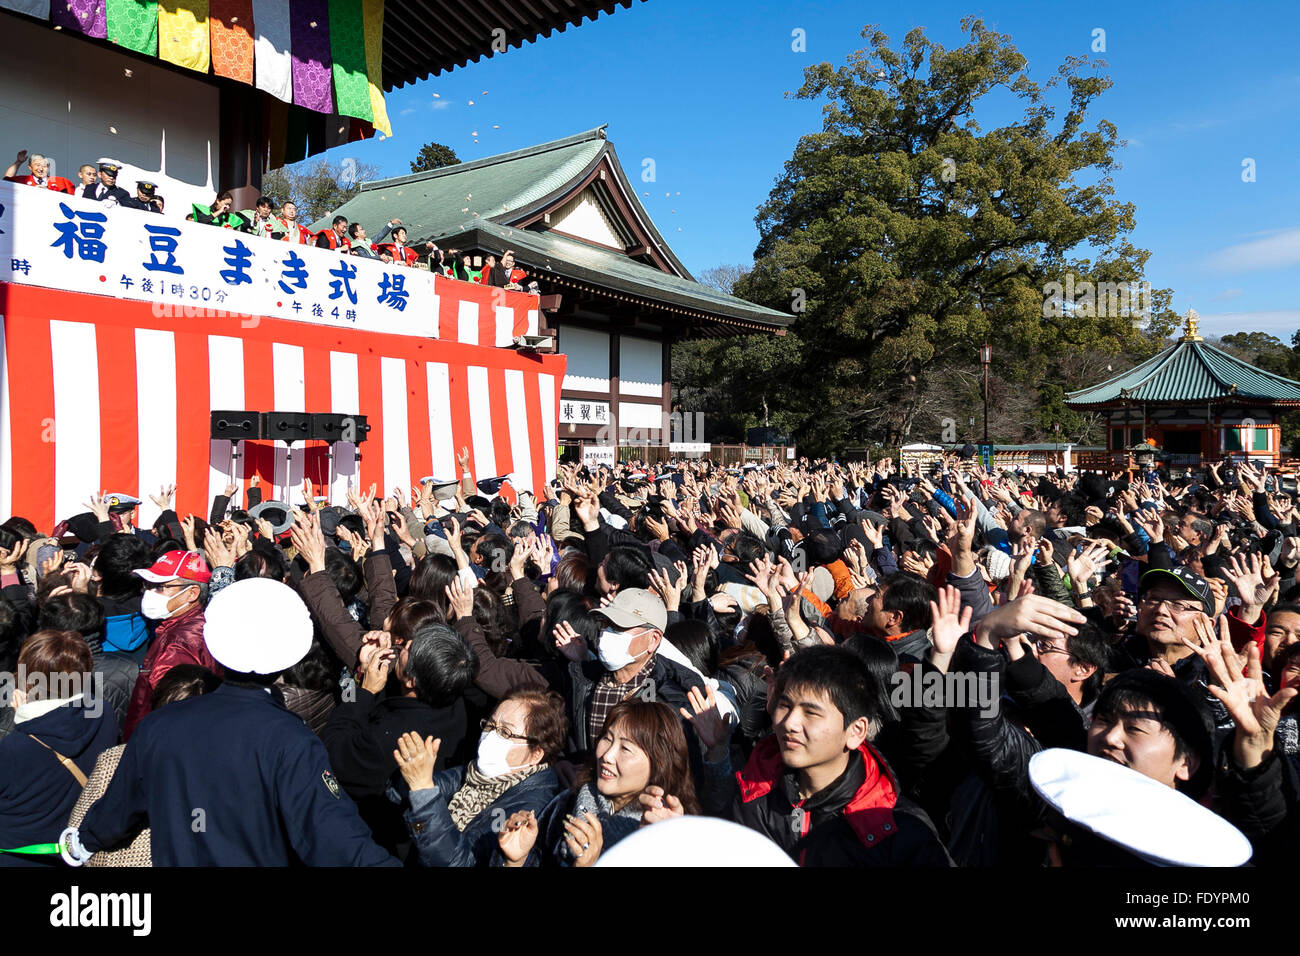 https://c8.alamy.com/comp/FDYPM0/visitors-scramble-to-collect-beans-during-a-setsubun-festival-at-naritasan-FDYPM0.jpg